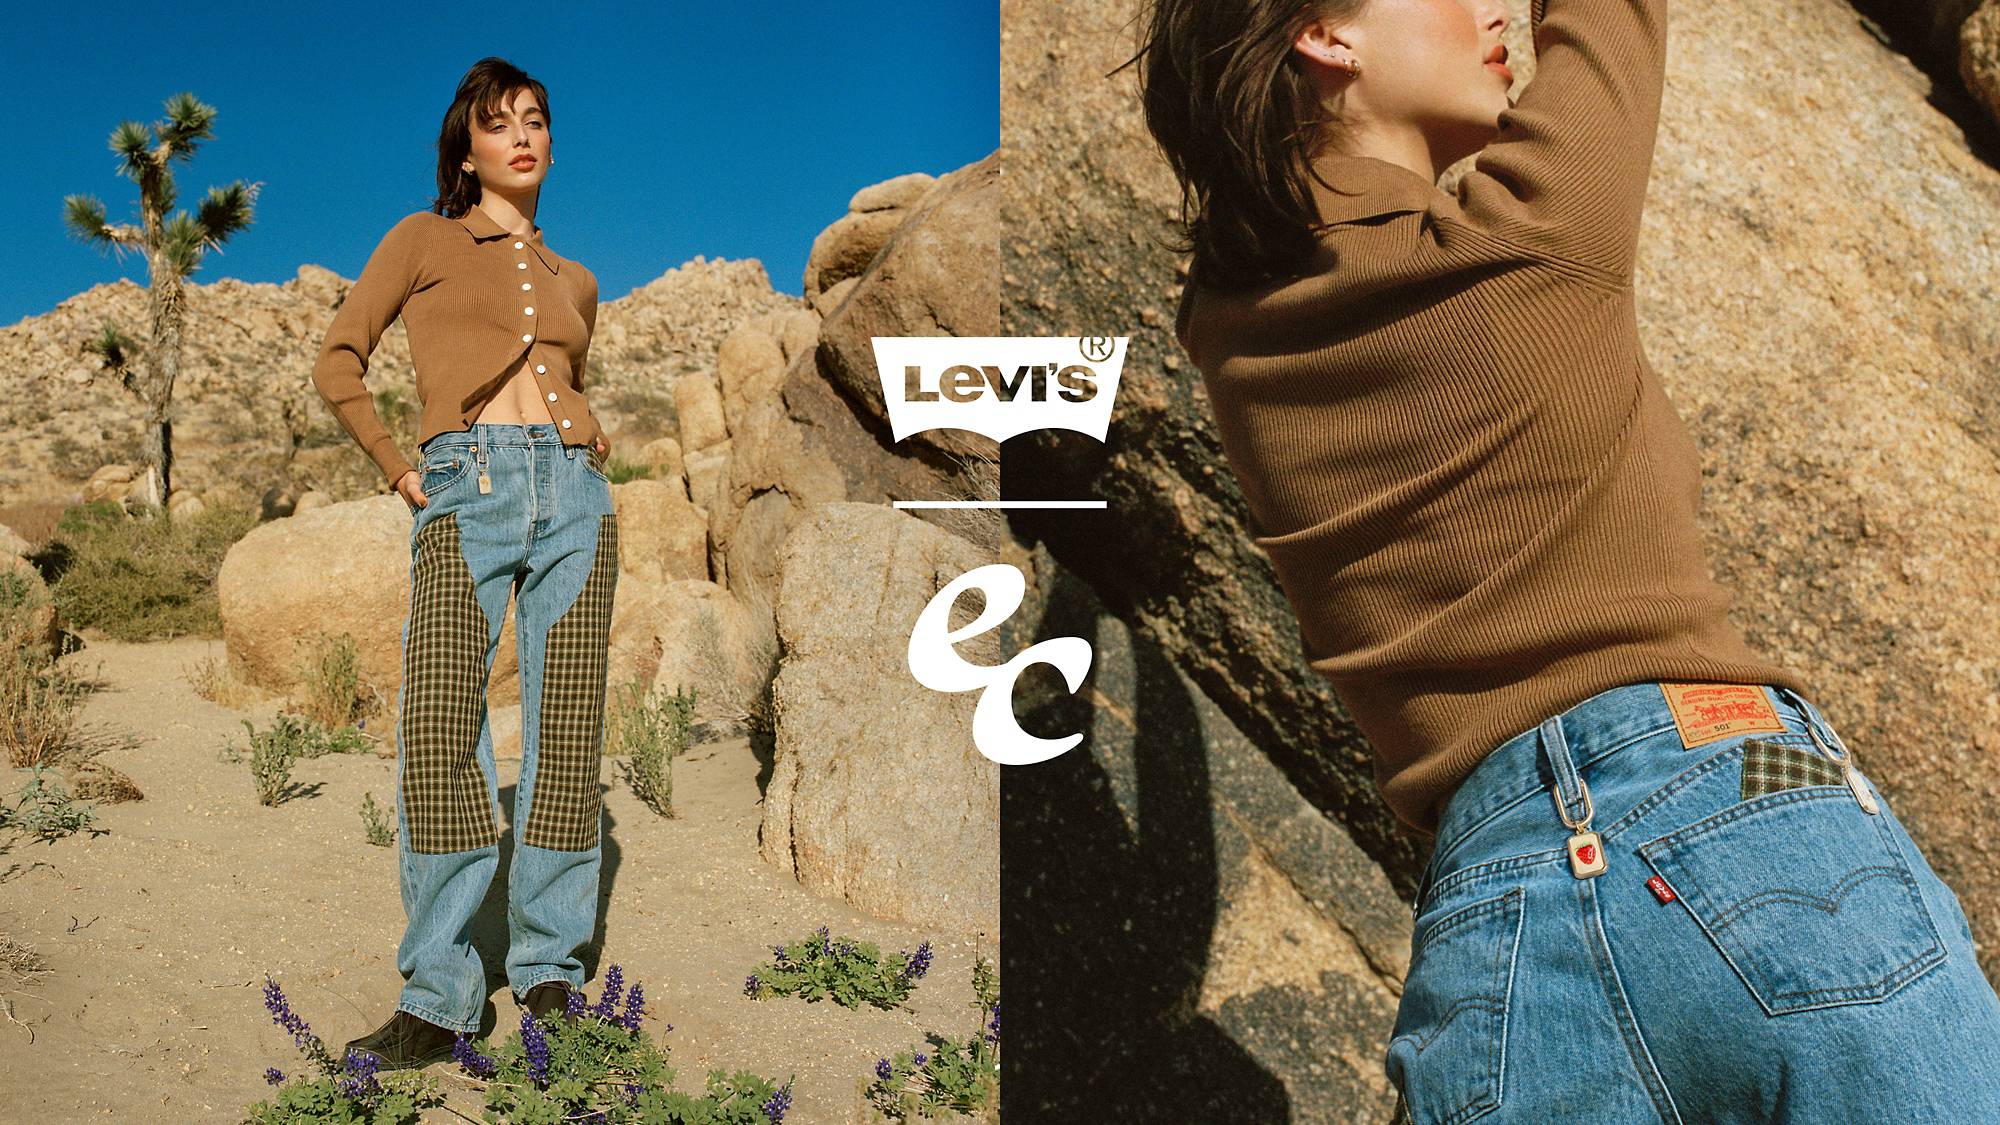 binair moed Hoopvol Levi's Warehouse Sale - Up to 75% Off Closeout Styles | Levi's® US